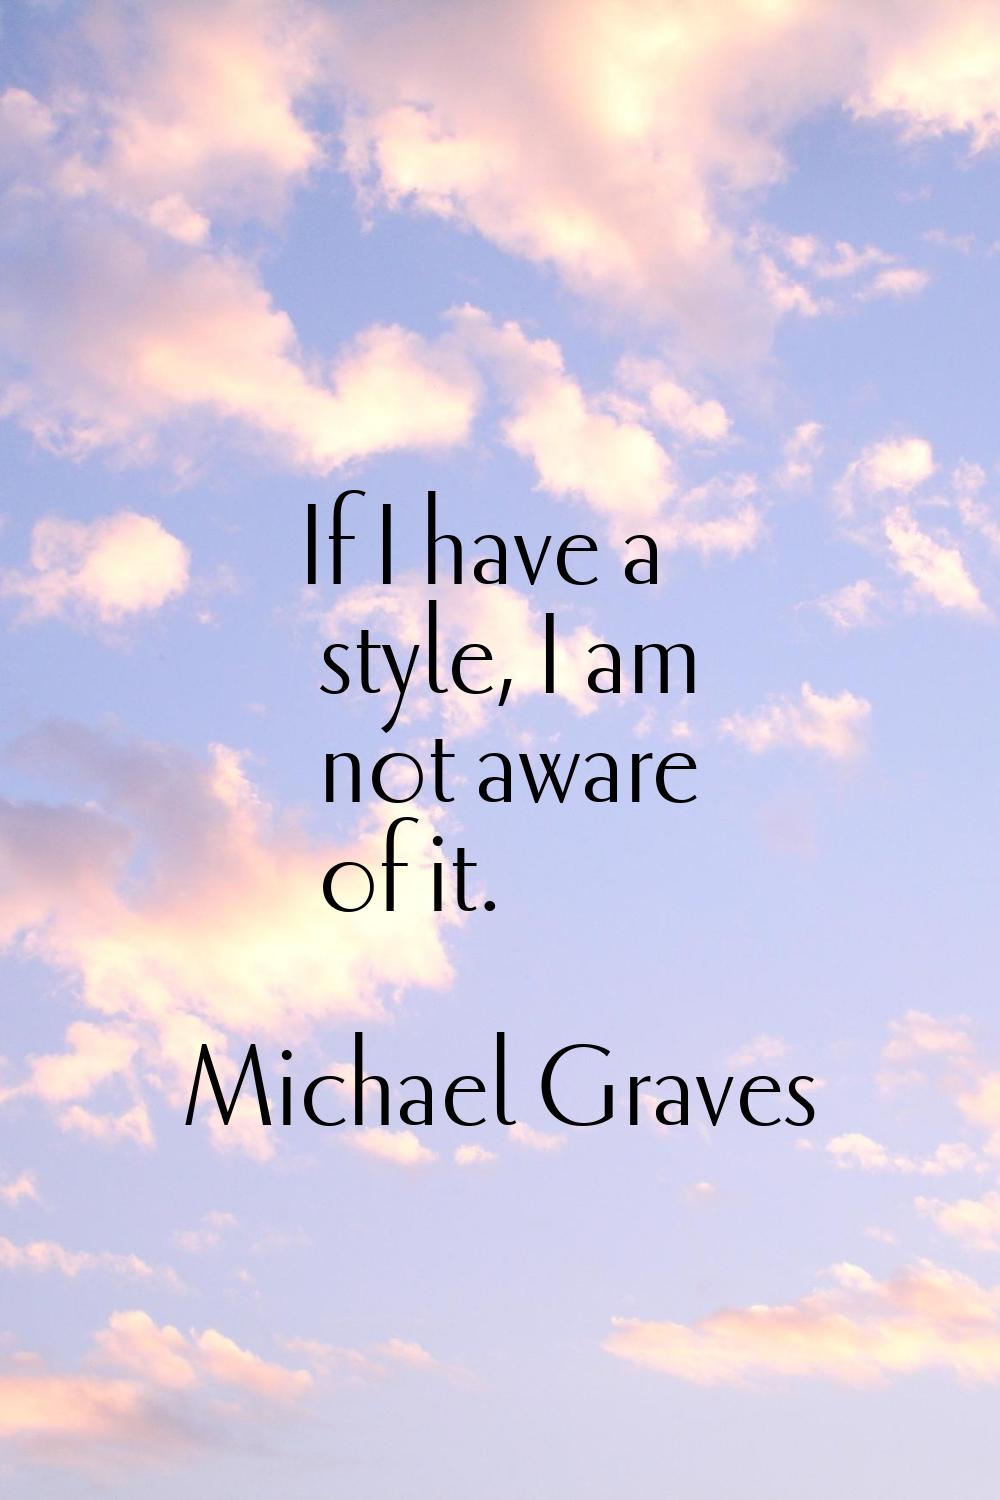 If I have a style, I am not aware of it.